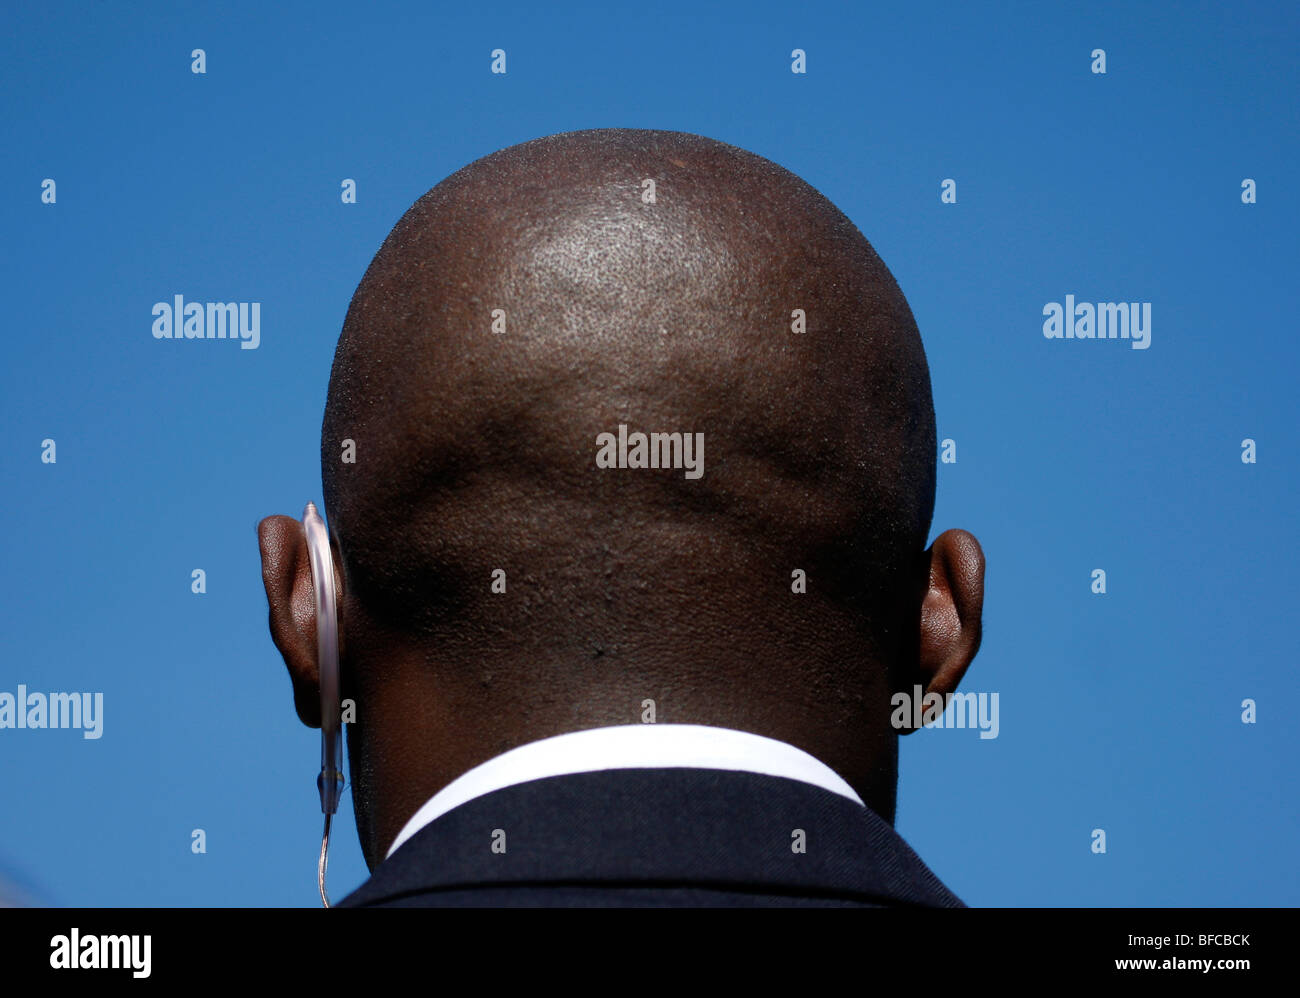 Bald head  of black security guard against blue sky Stock Photo